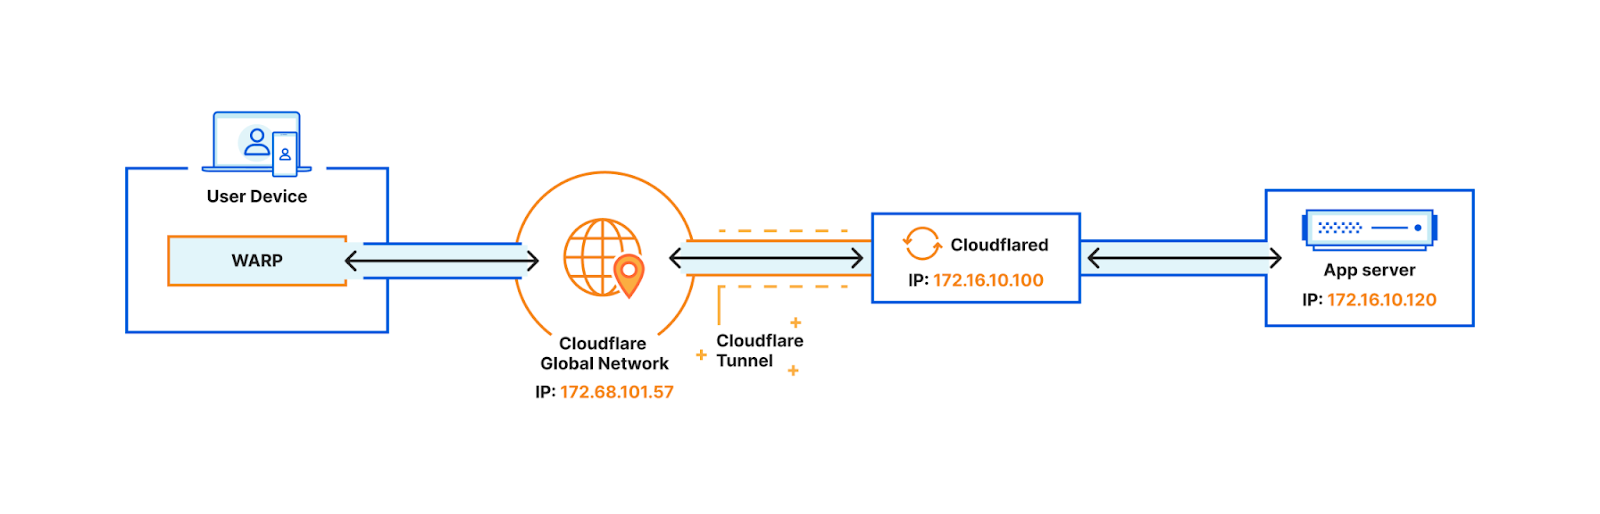 Give us a ping. (Cloudflare) One ping only.